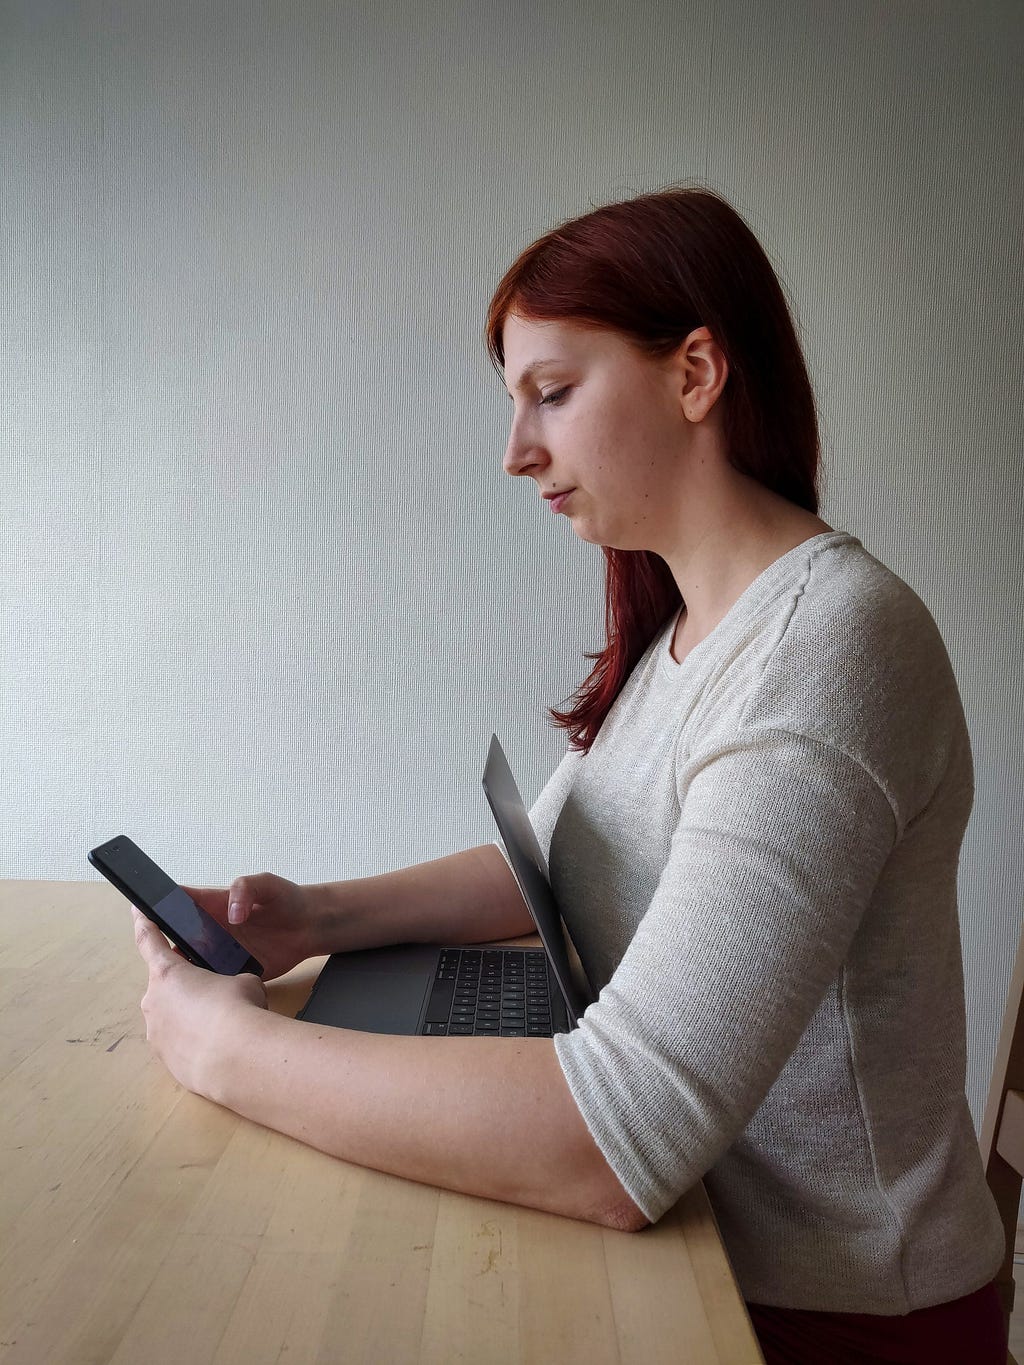 Woman hugging her laptop while using her mobile device